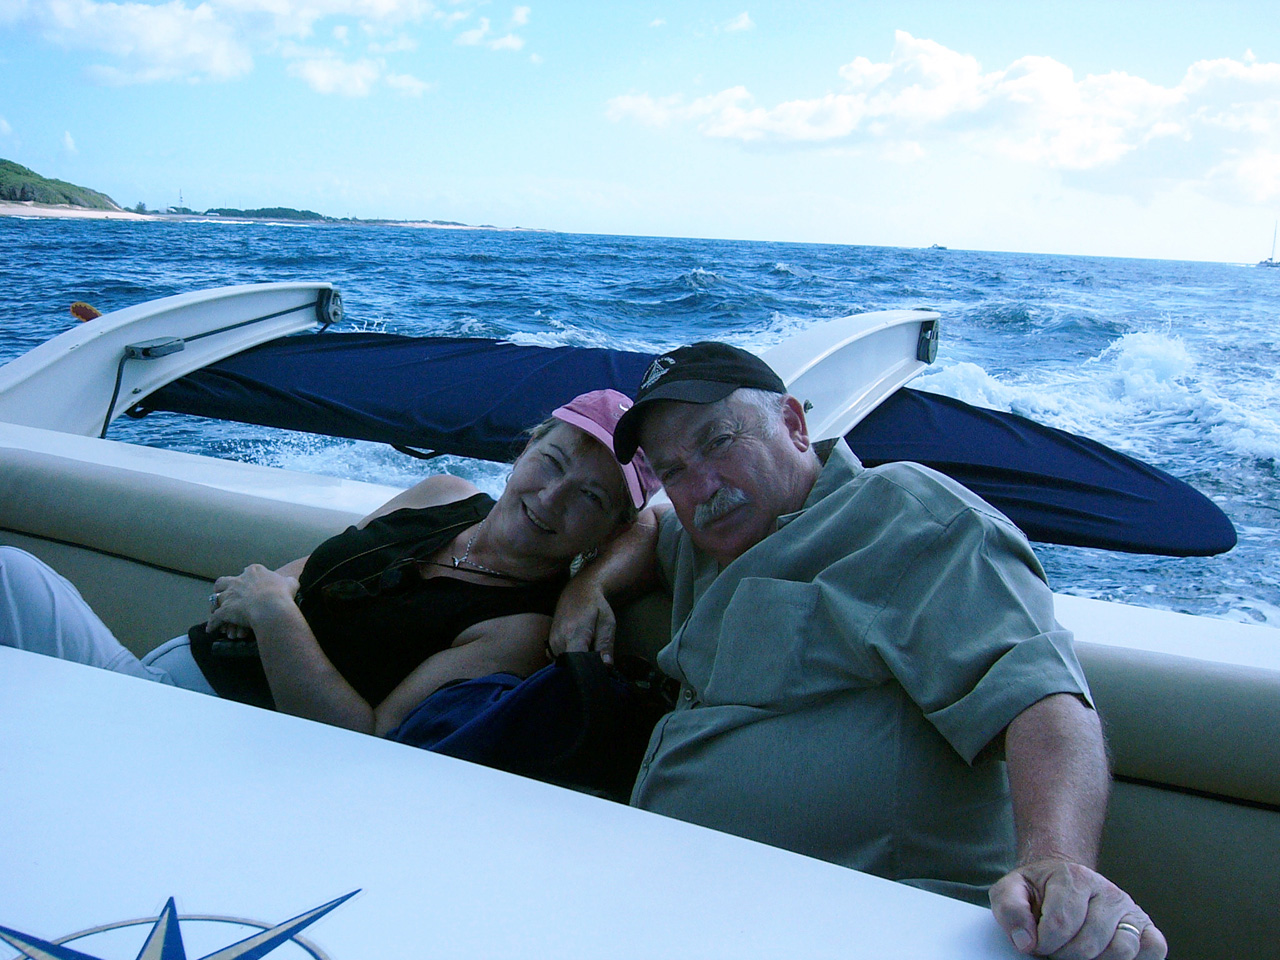 Ron and his wife, Joanne, love sailing off the Napali Coast, Hawaii on a custom 65 foot luxury sailing catamaran. Photo courtesy Ron Picavet, IT Services